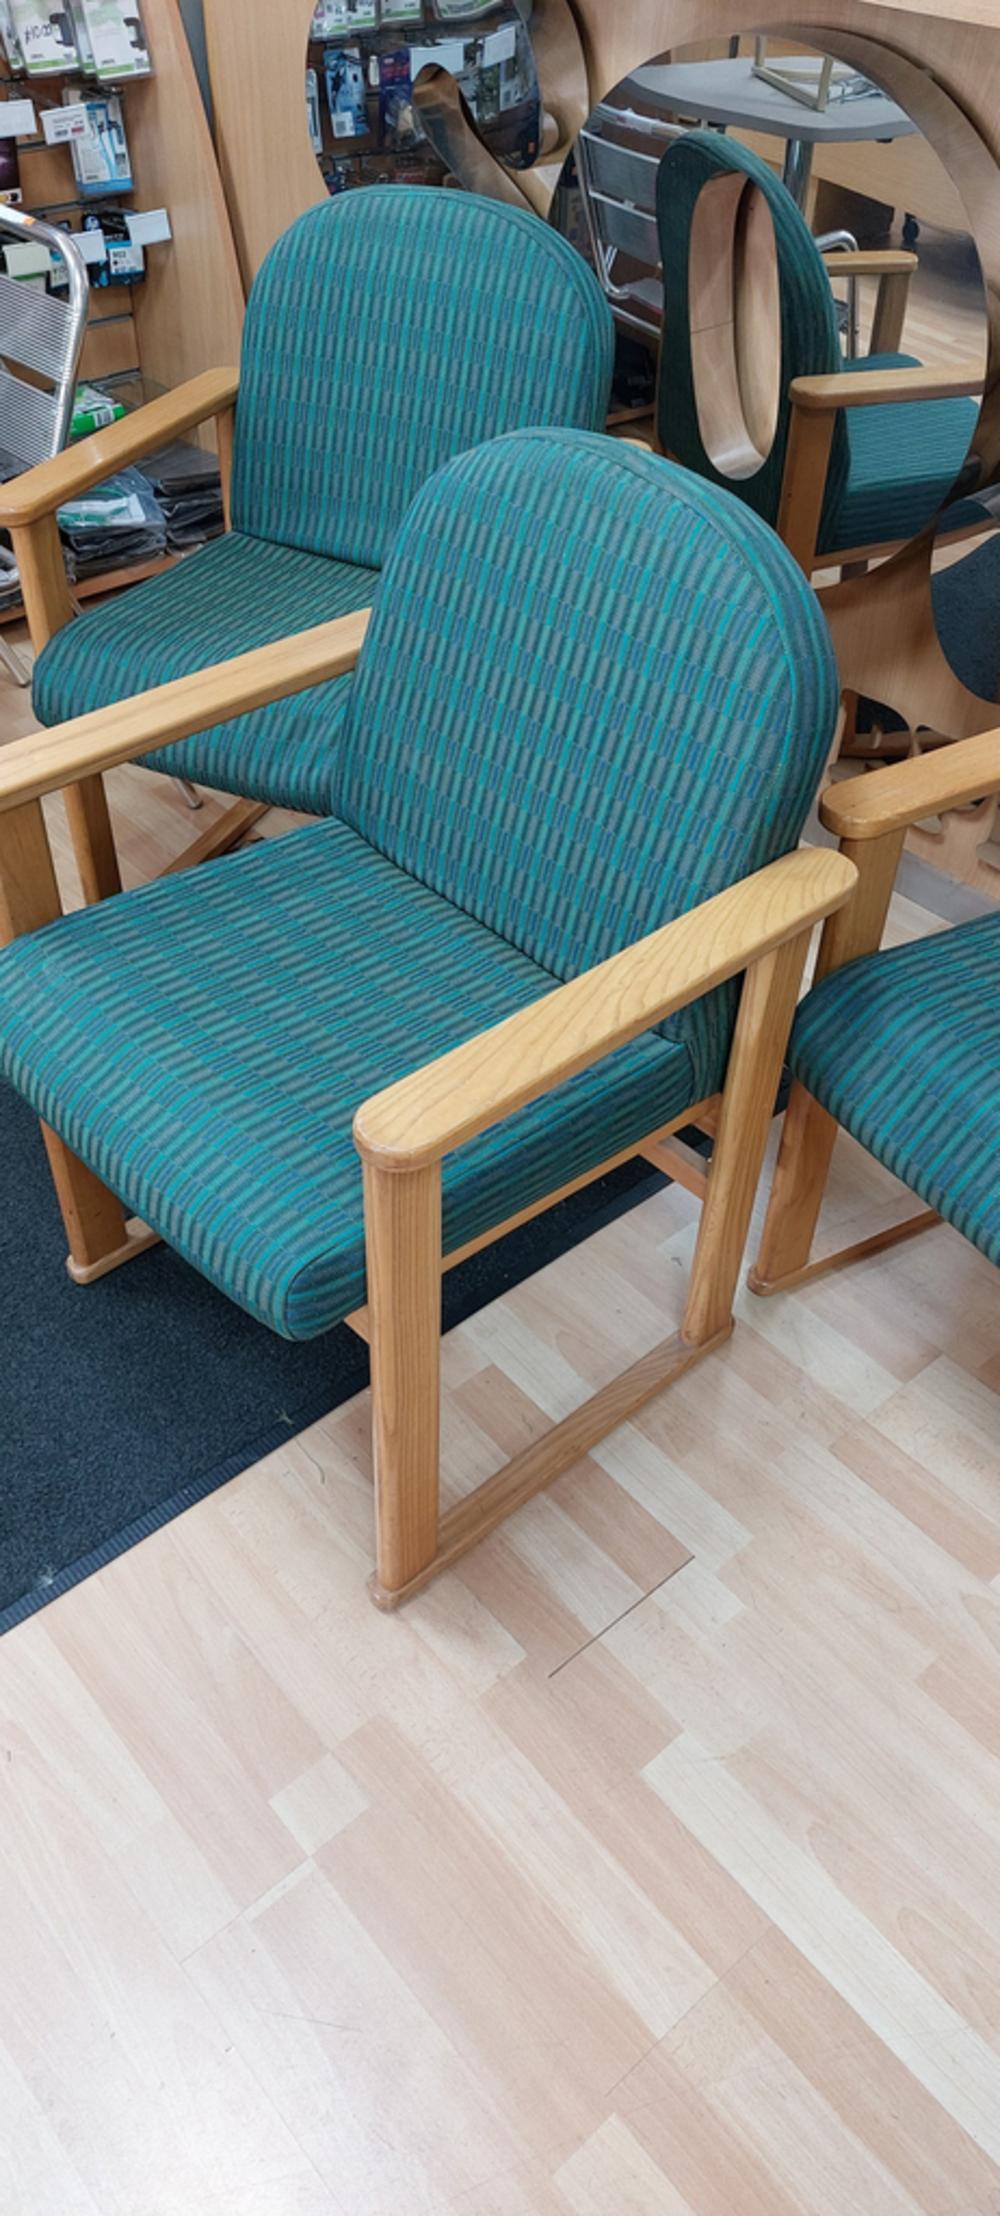 Set Of 3 Low Level Reception Chairs With Wooden Arms 